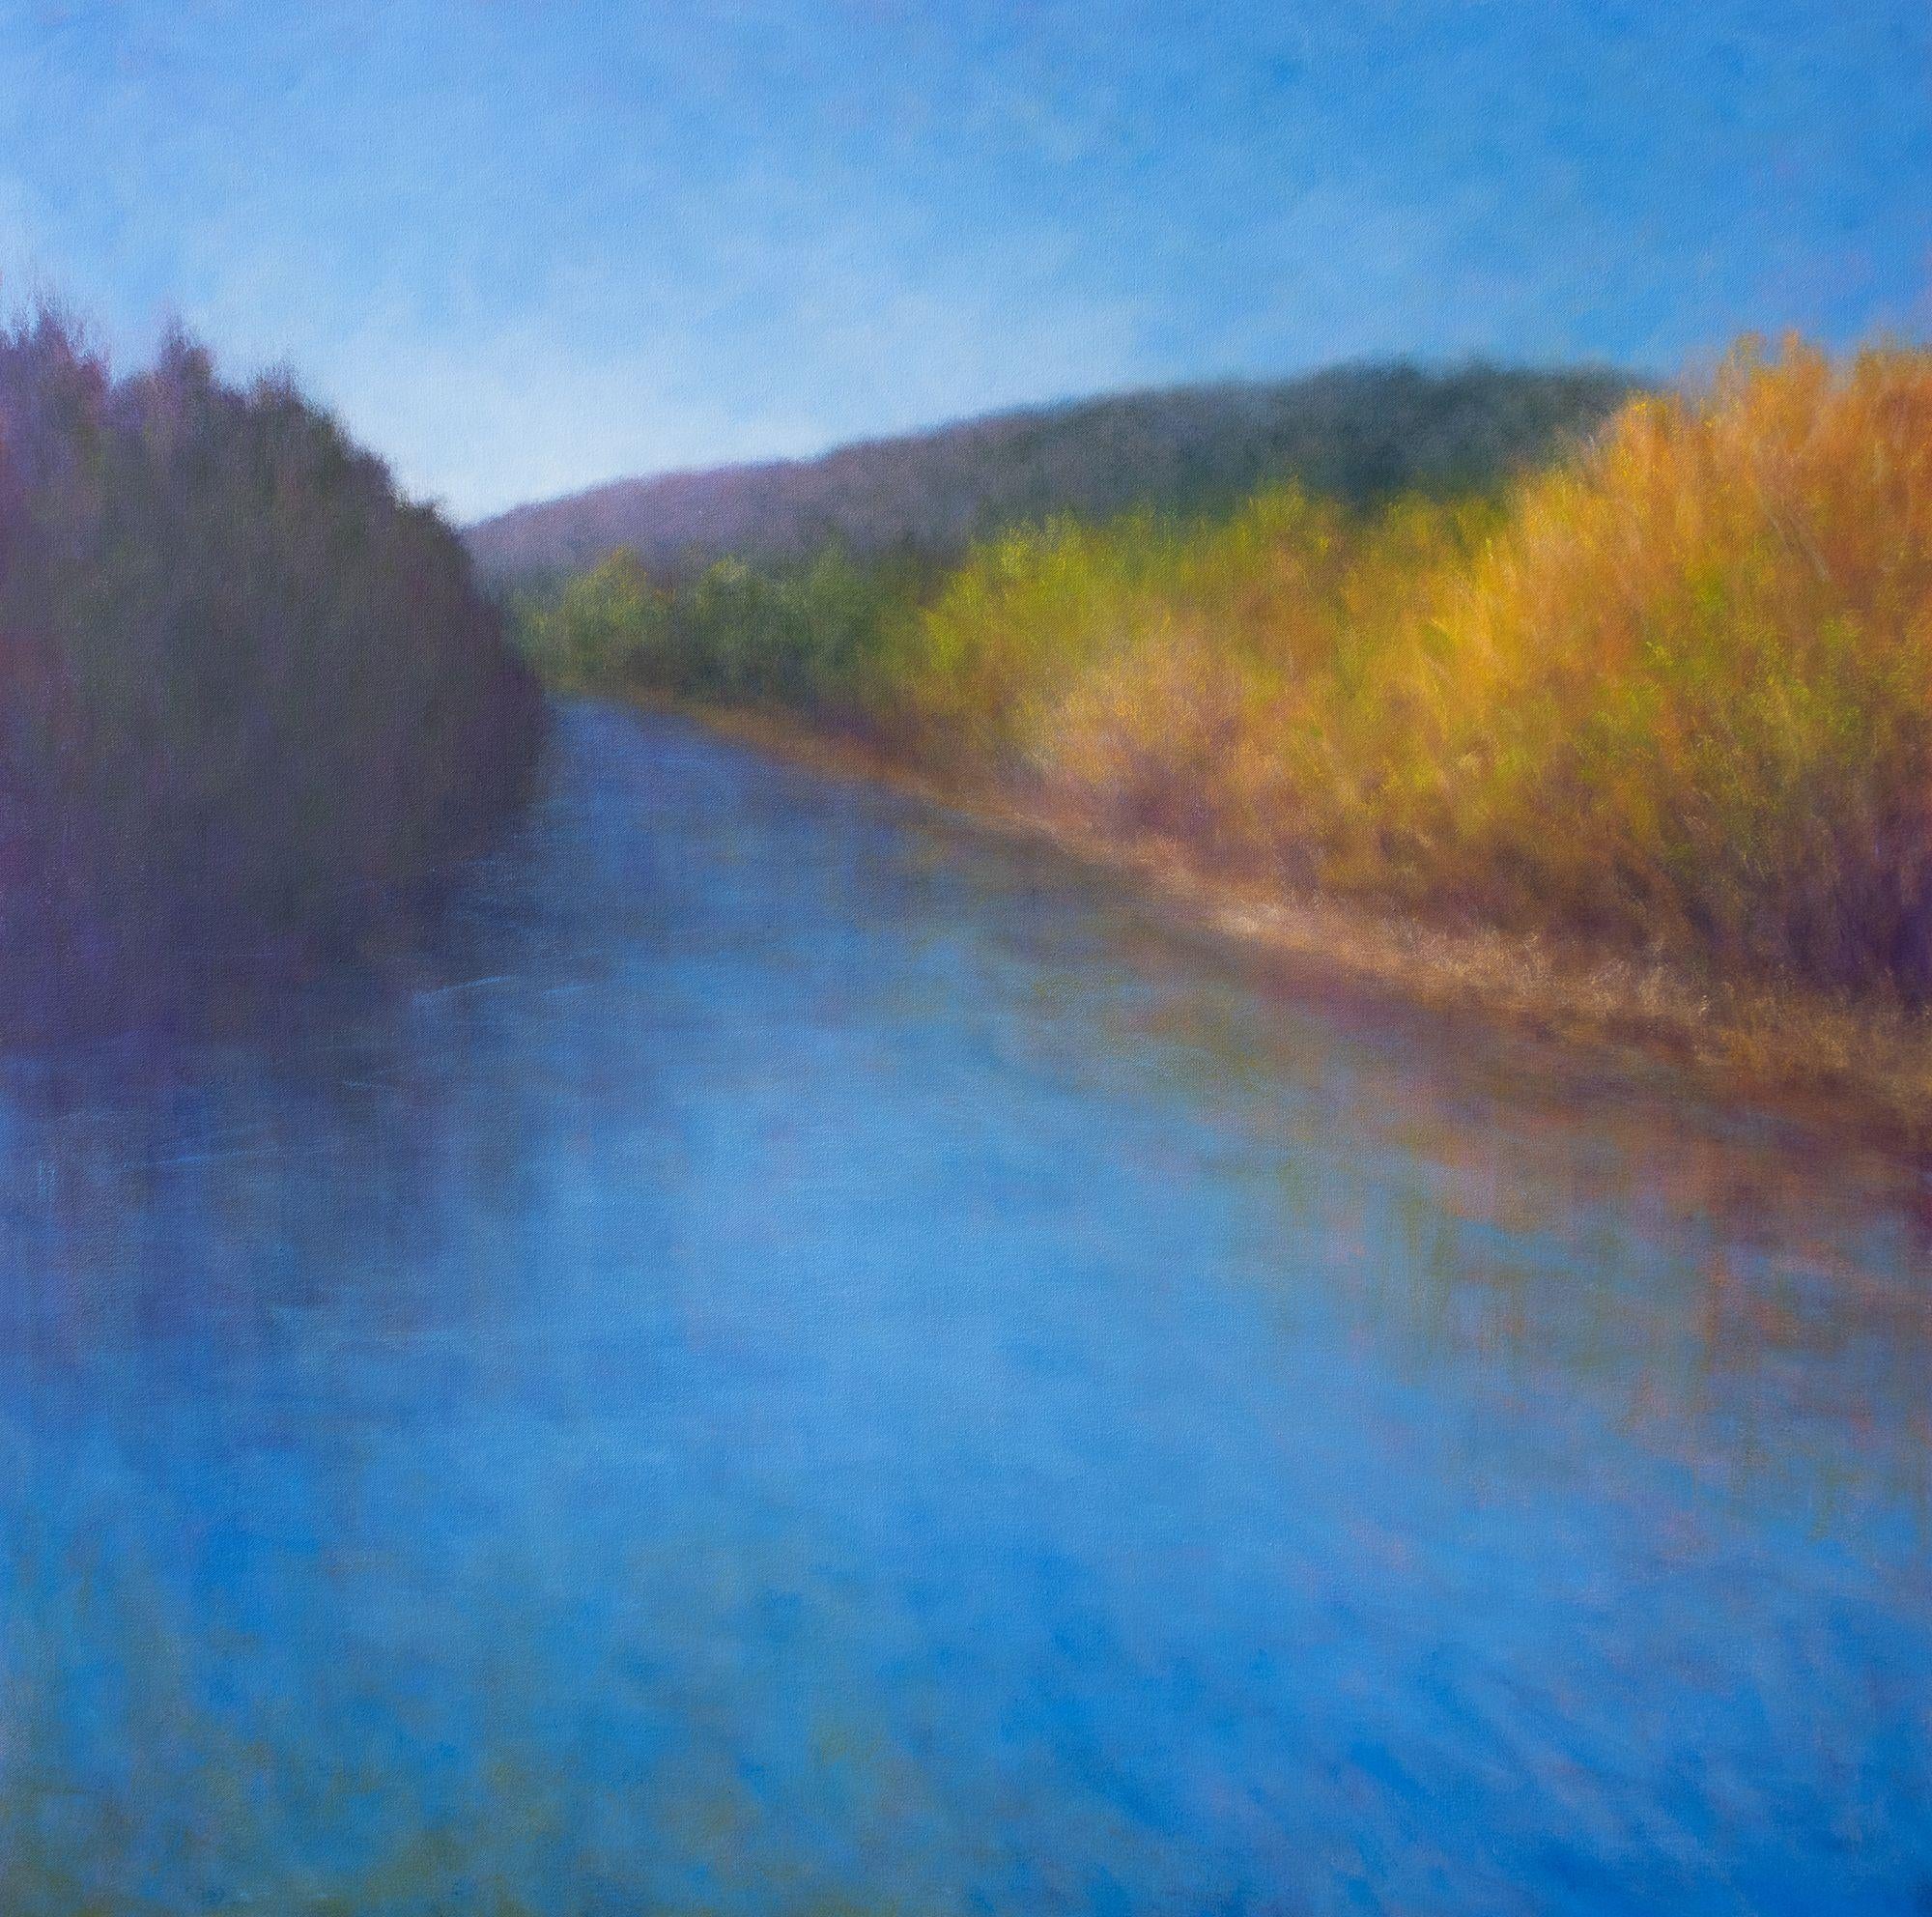 An award winning painting! Memories of an afternoon spent walking along the shores of the Russian River in Healdsburg, CA. Listening to the sounds of the birds singing and peaceful tinkling of the water as it slowly moves past. Varnished and ready